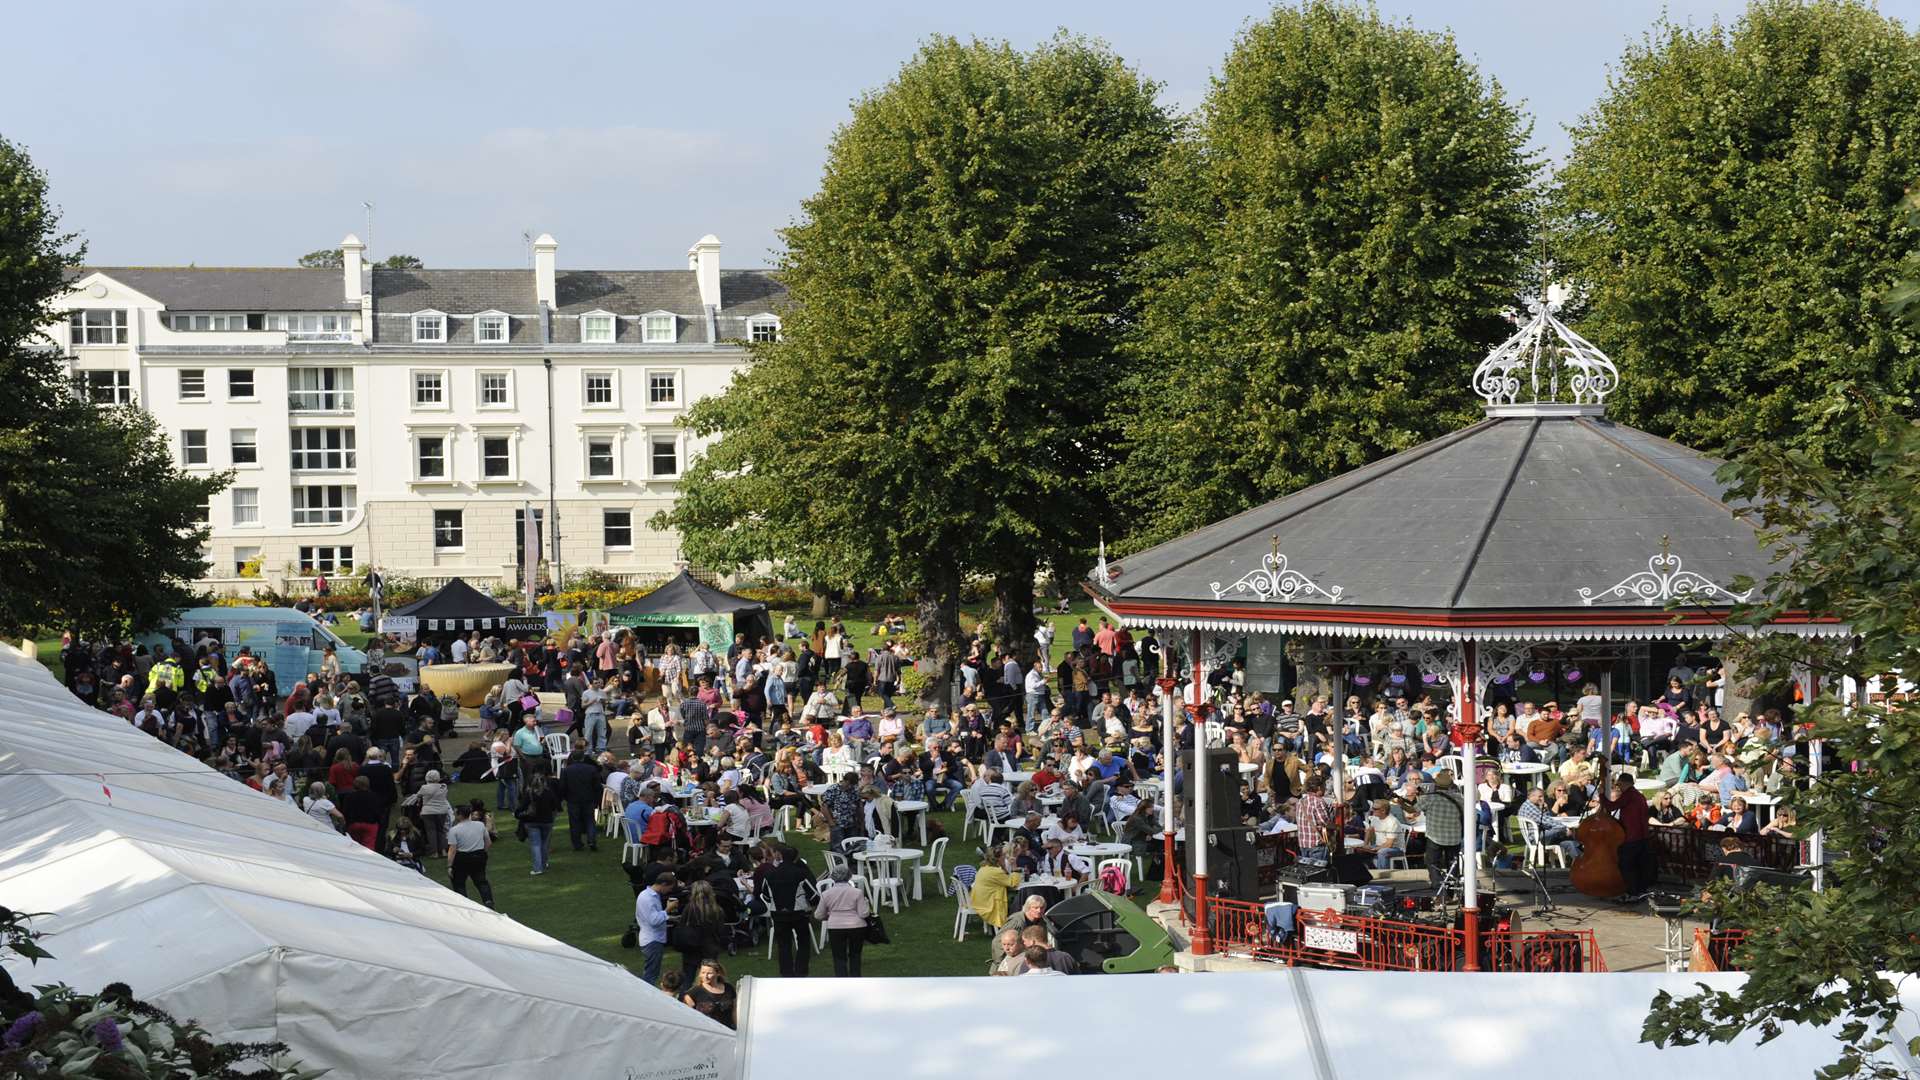 Canterbury Food and Drink festival returns this year with Kent's finest produce